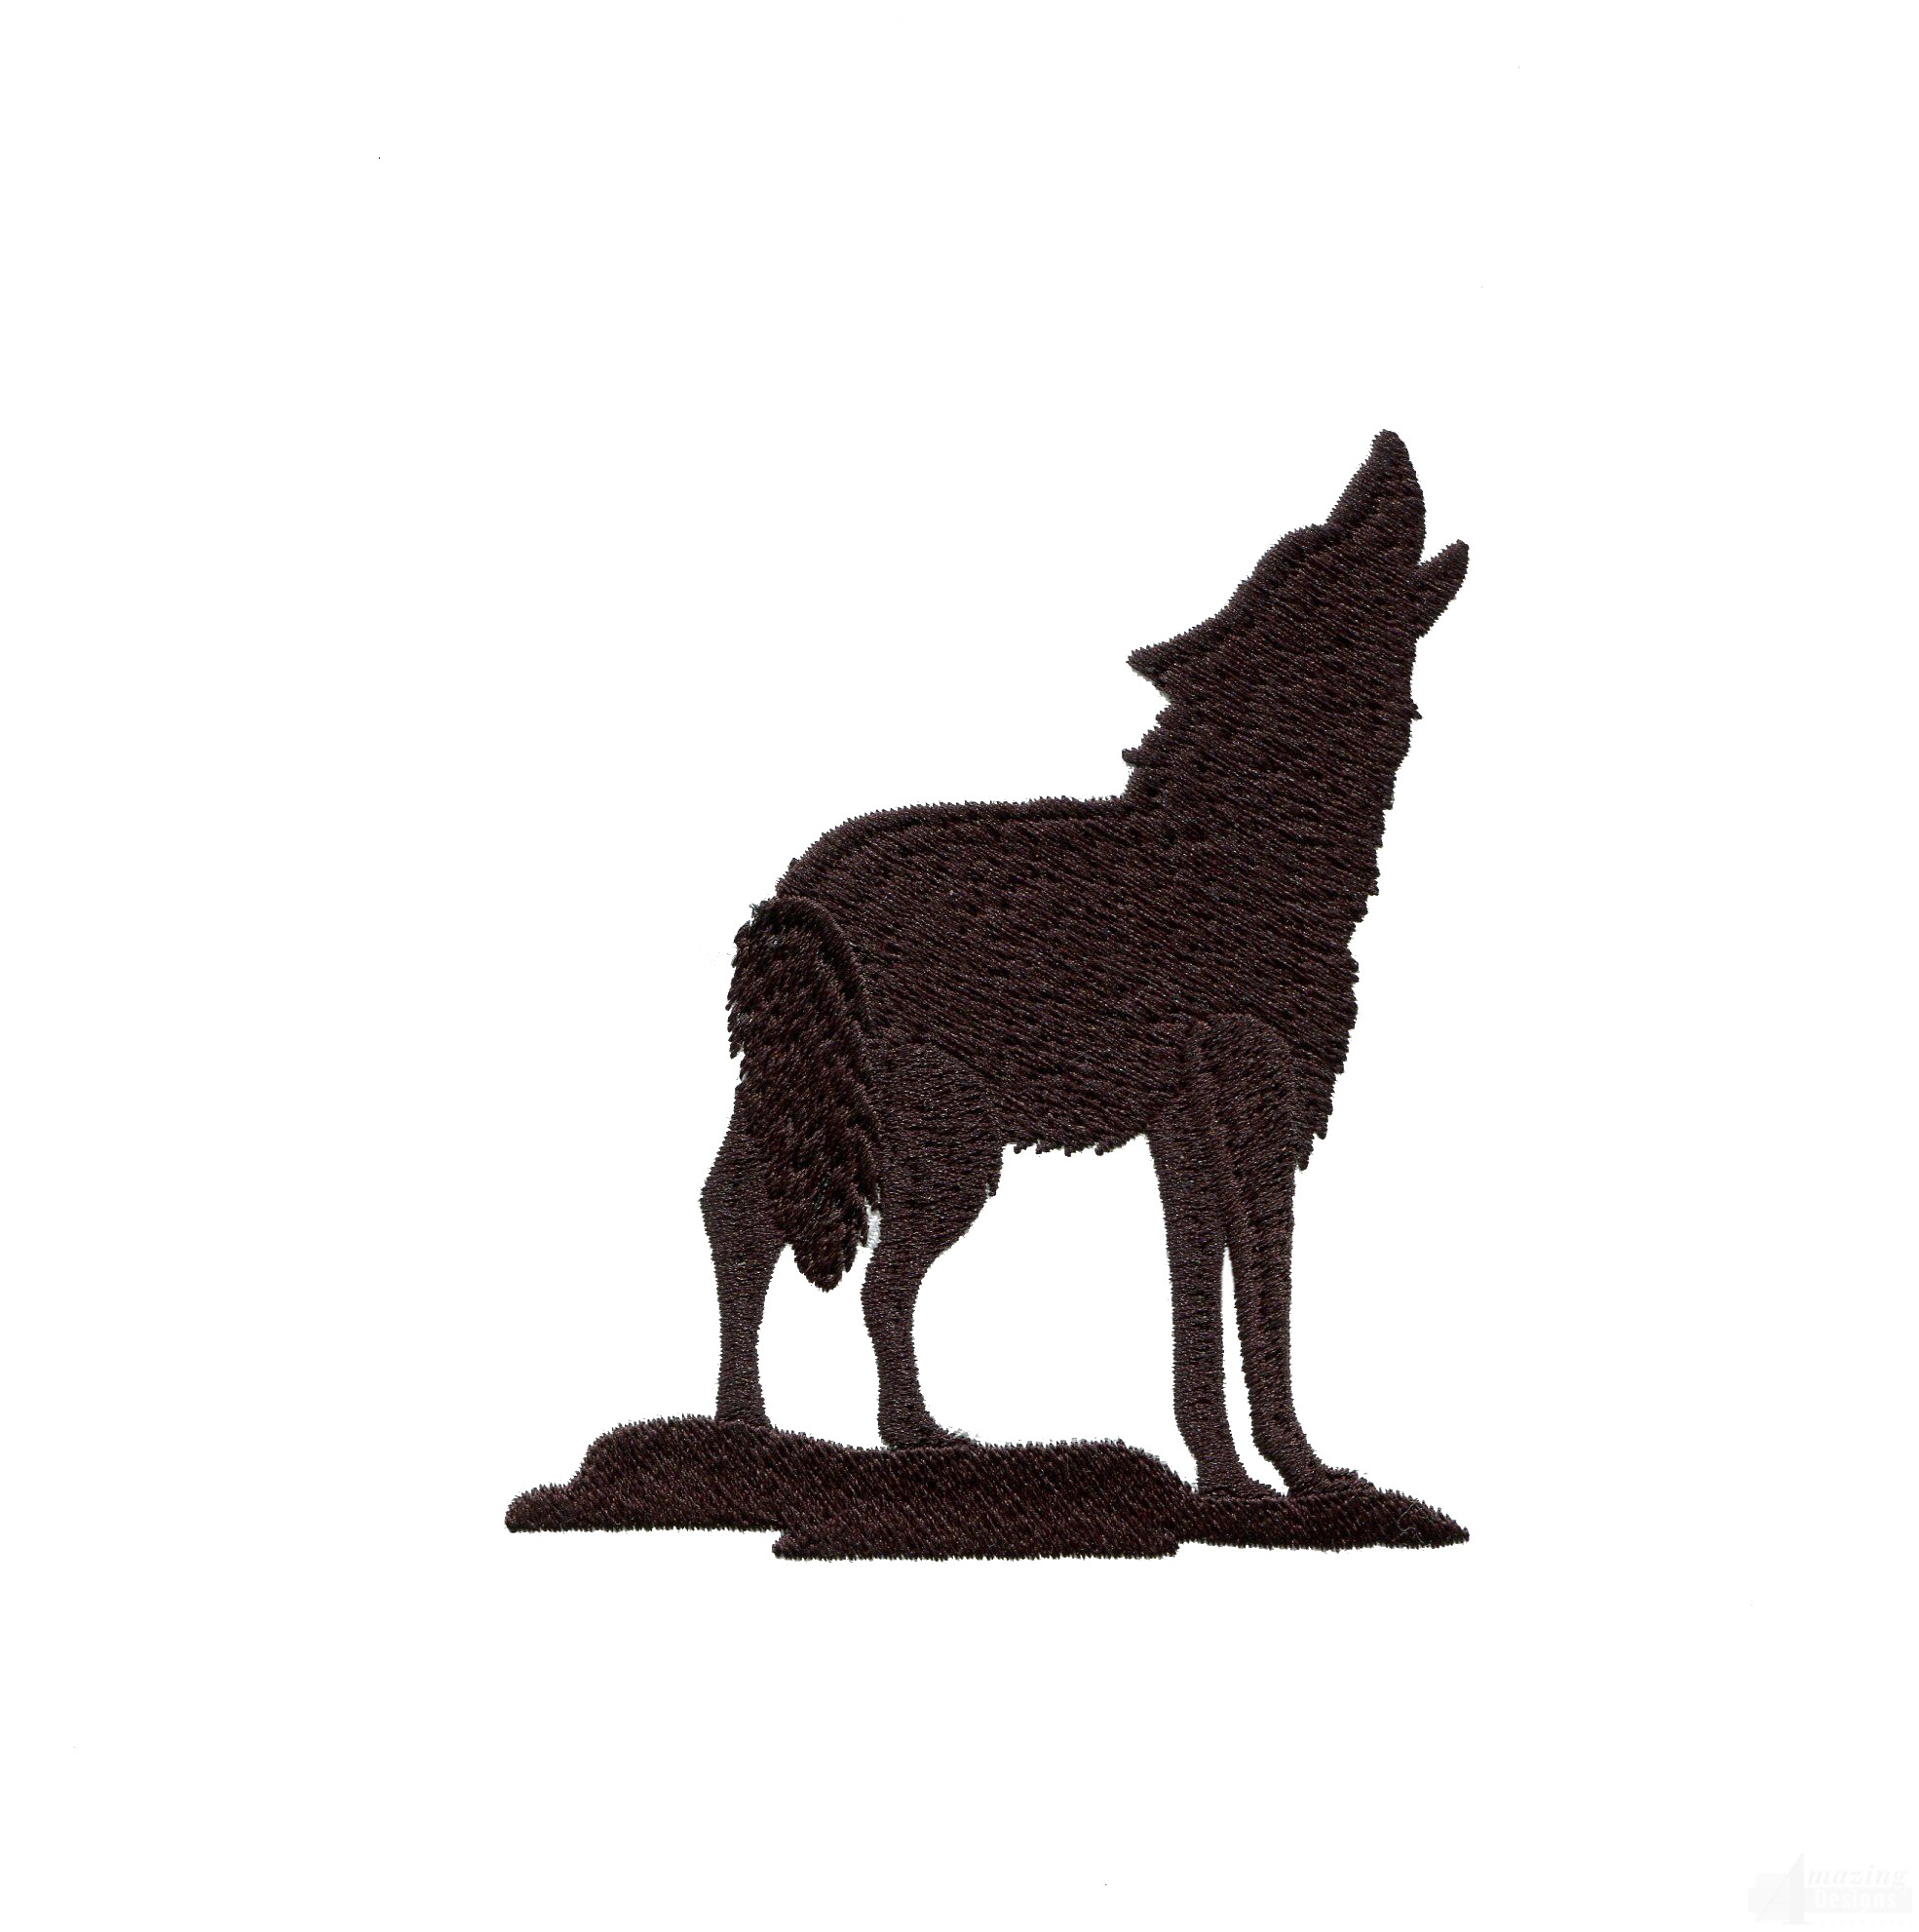 Coyote Baying At The Moon Silhouette Images - ClipArt Best